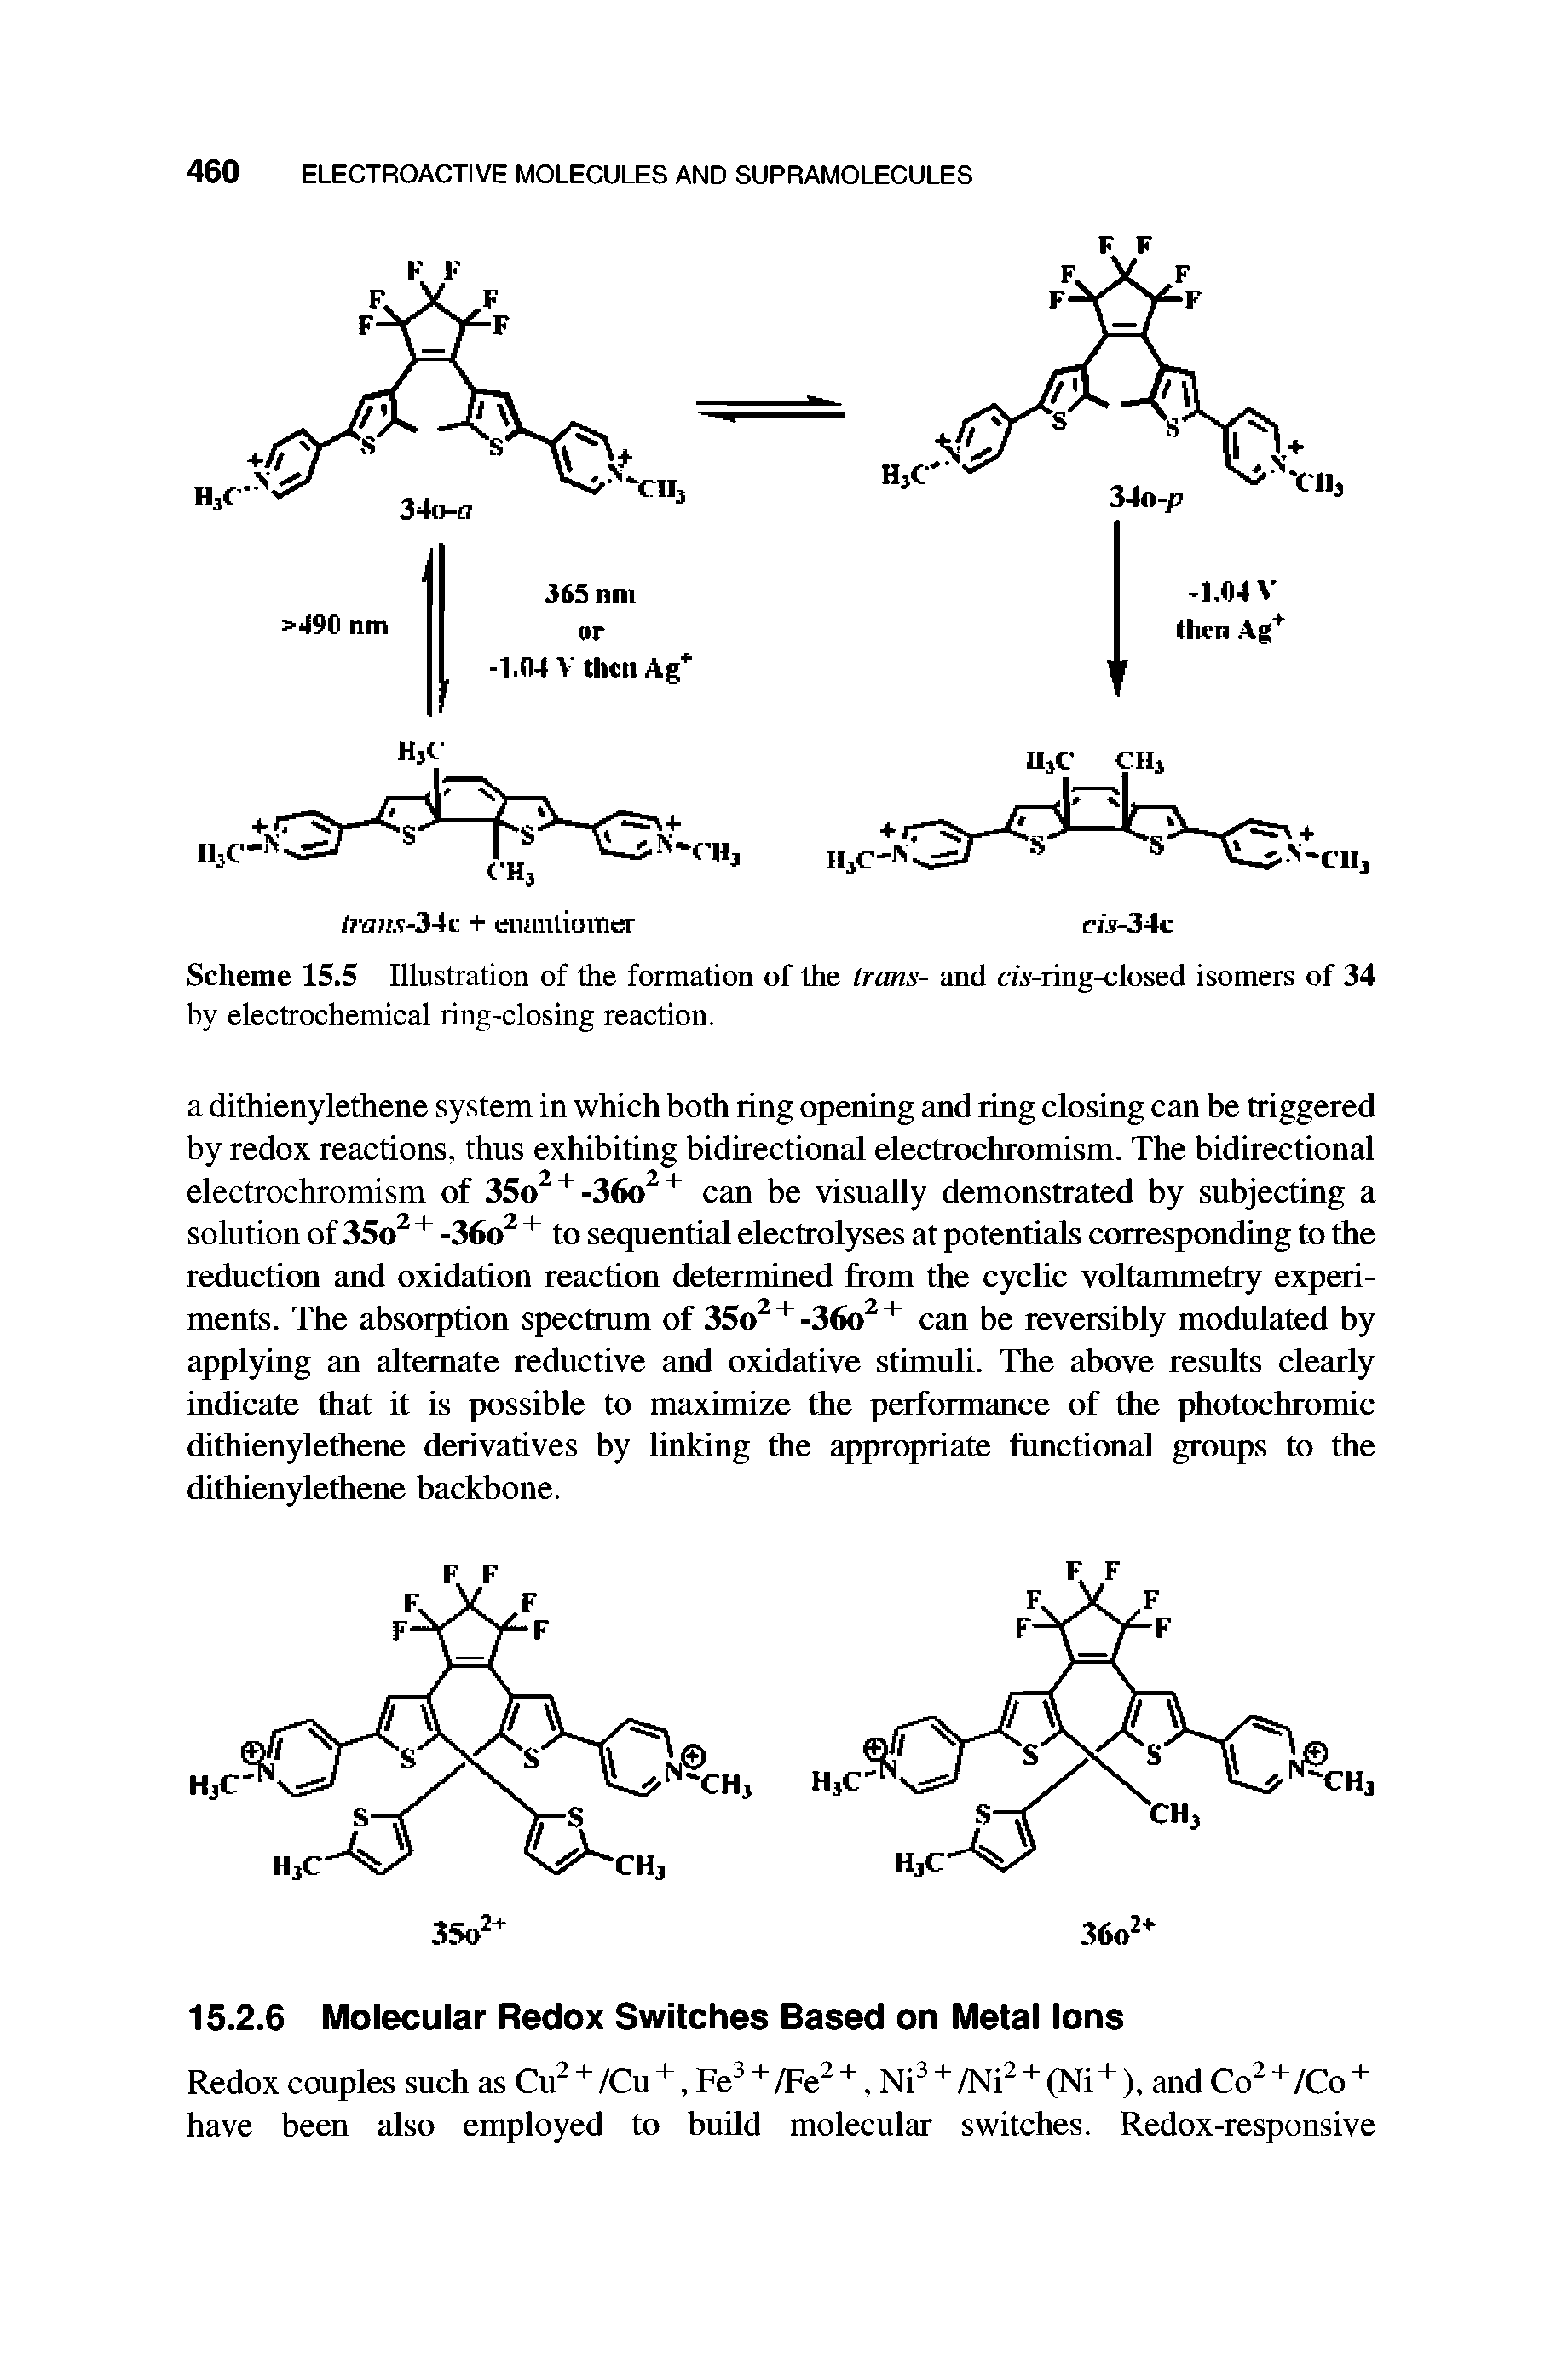 Scheme 15.5 Illustration of the formation of the trans- and a.v-ring-closed isomers of 34 by electrochemical ring-closing reaction.